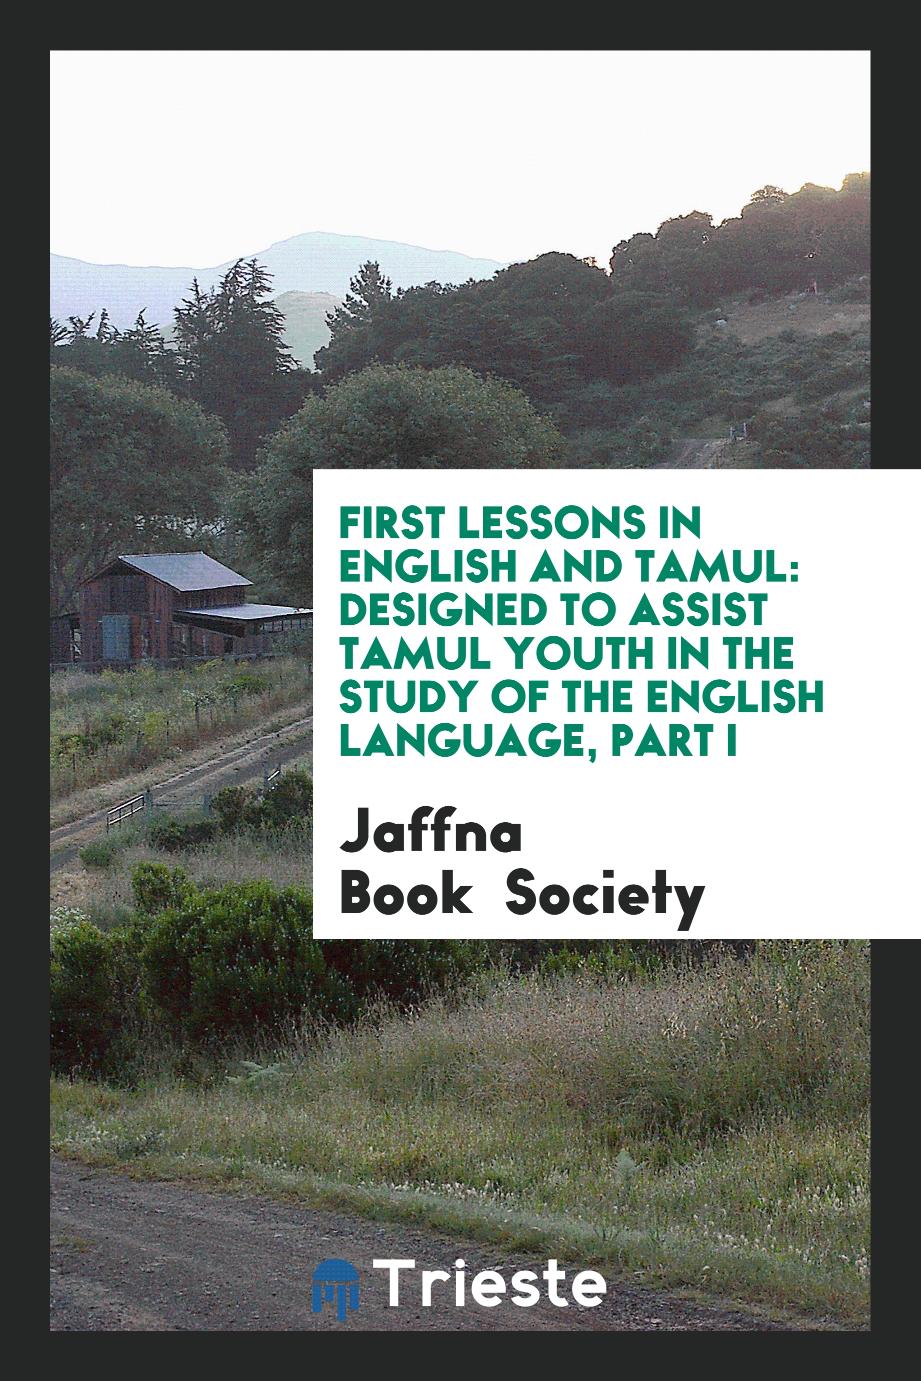 First Lessons in English and Tamul: Designed to Assist Tamul Youth in the study of the english language, part I